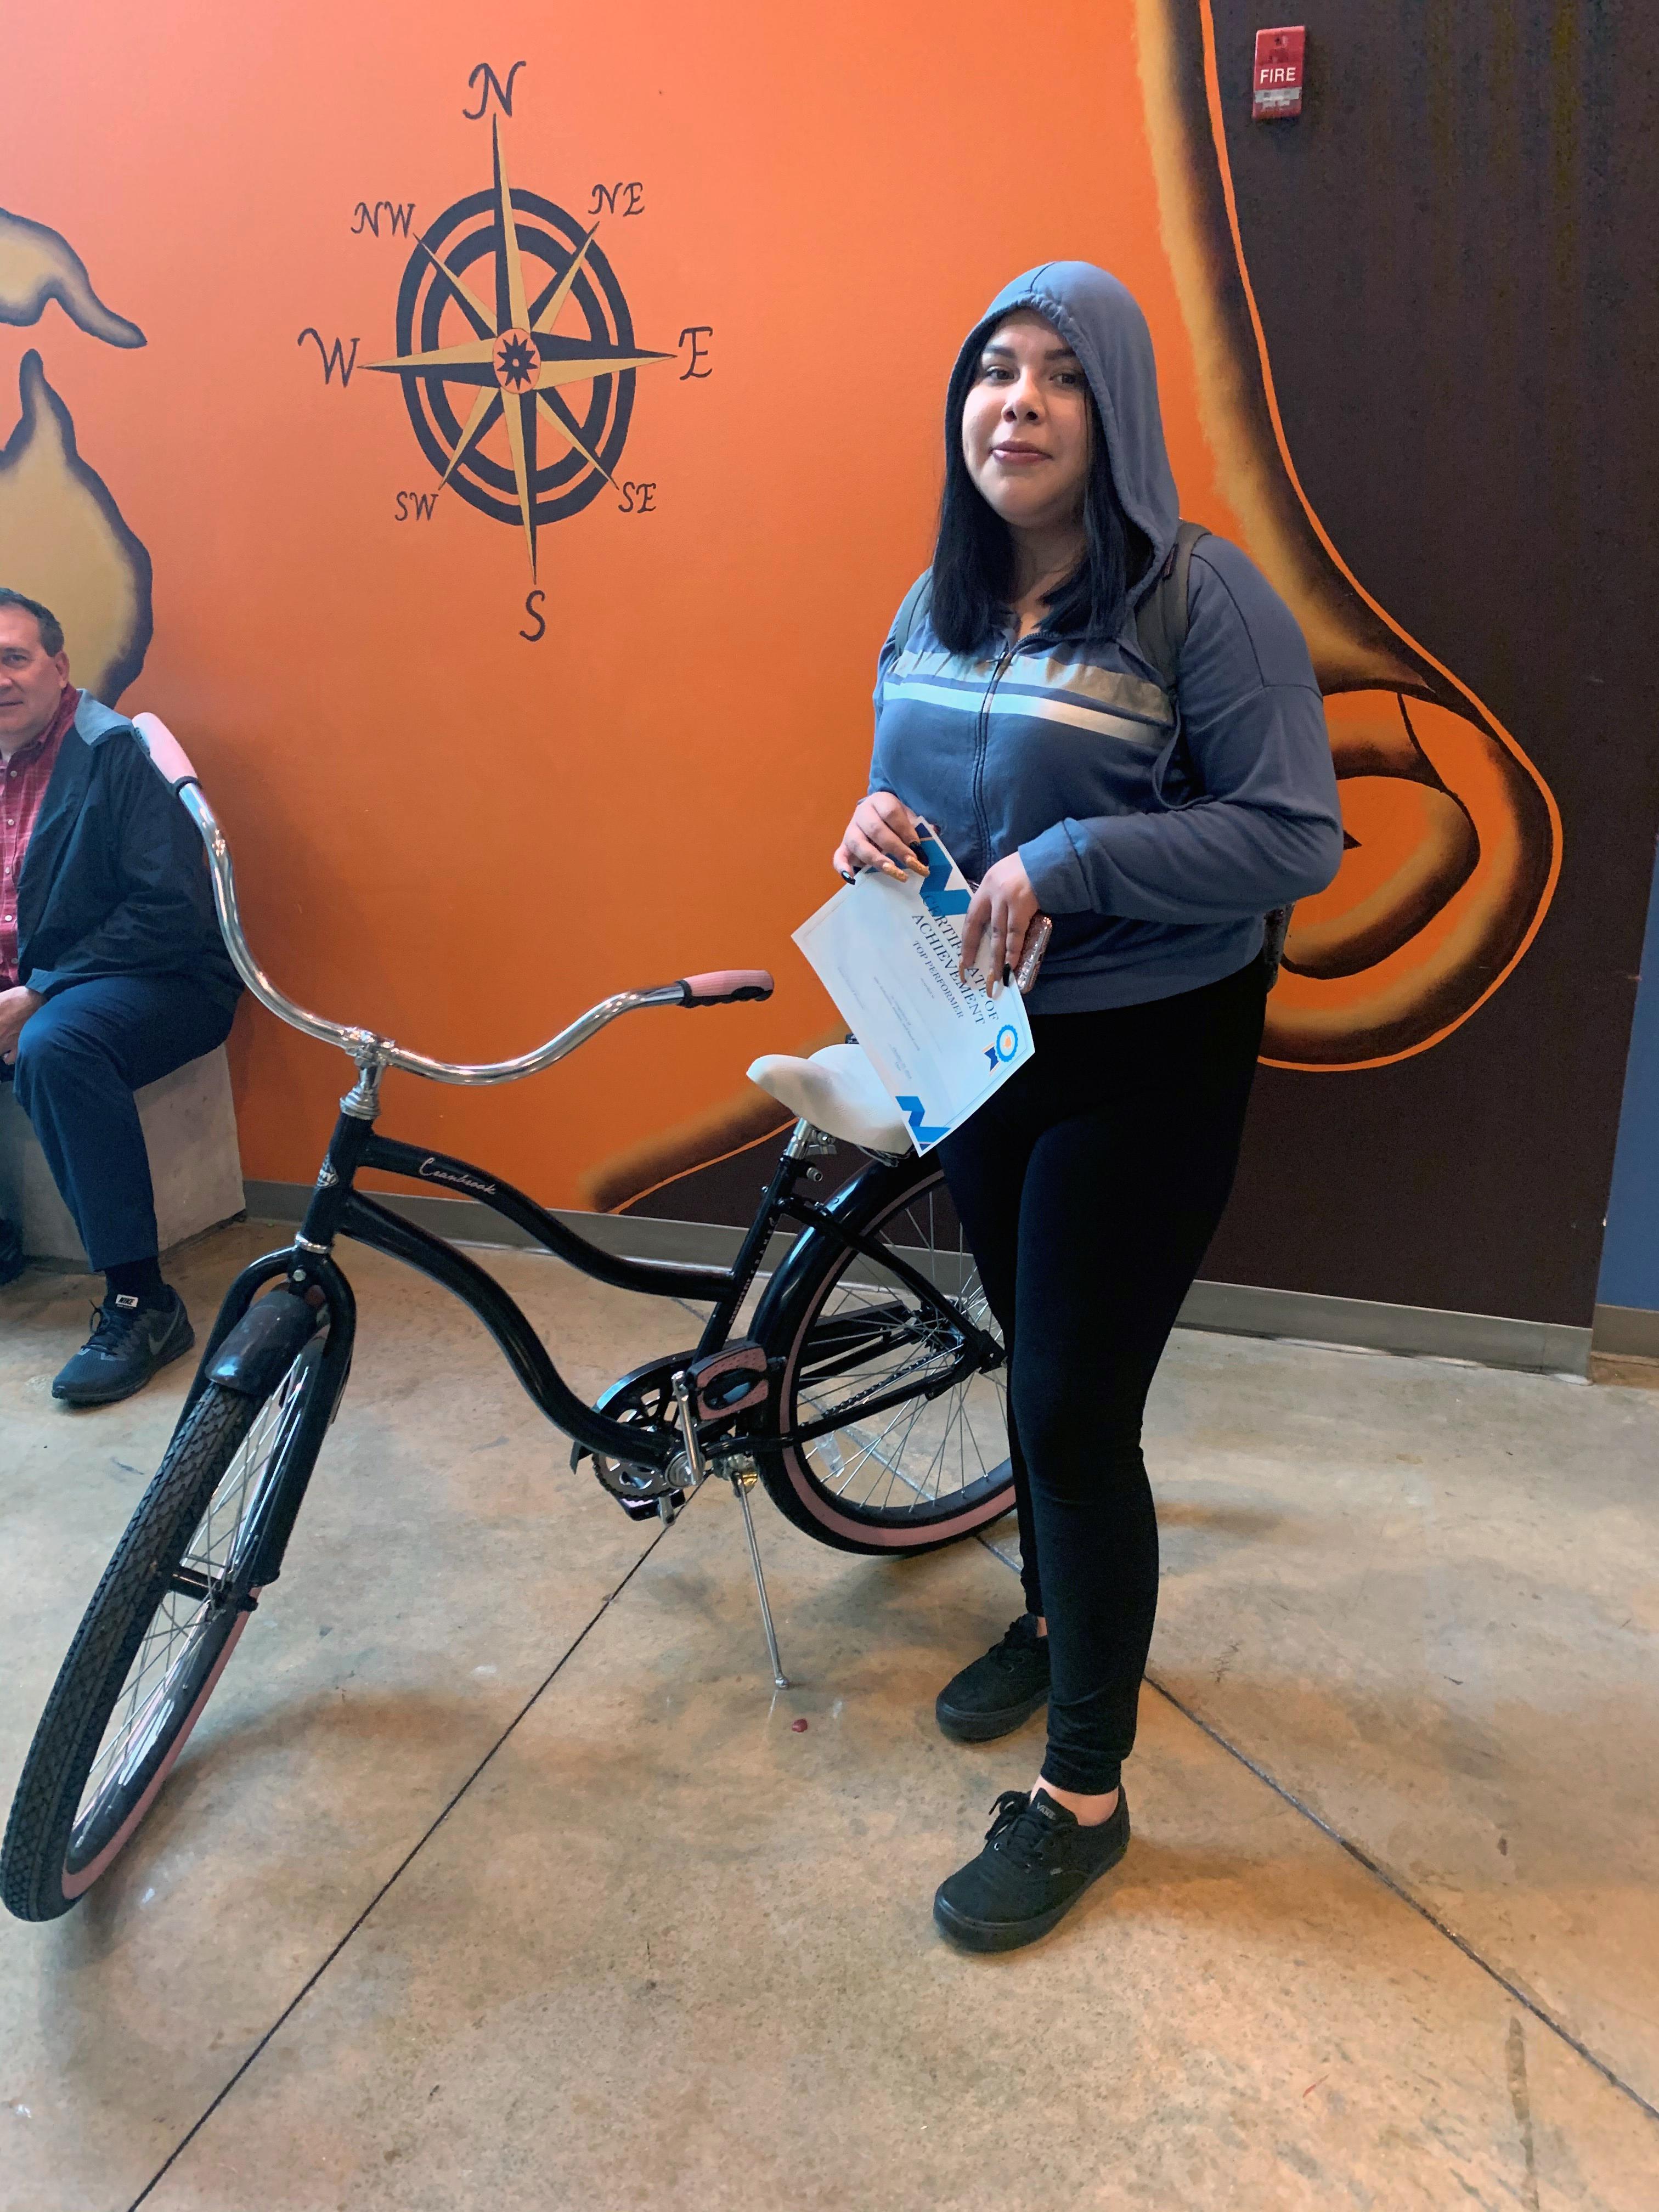 Pictured Student Winner, won a bike during assembly